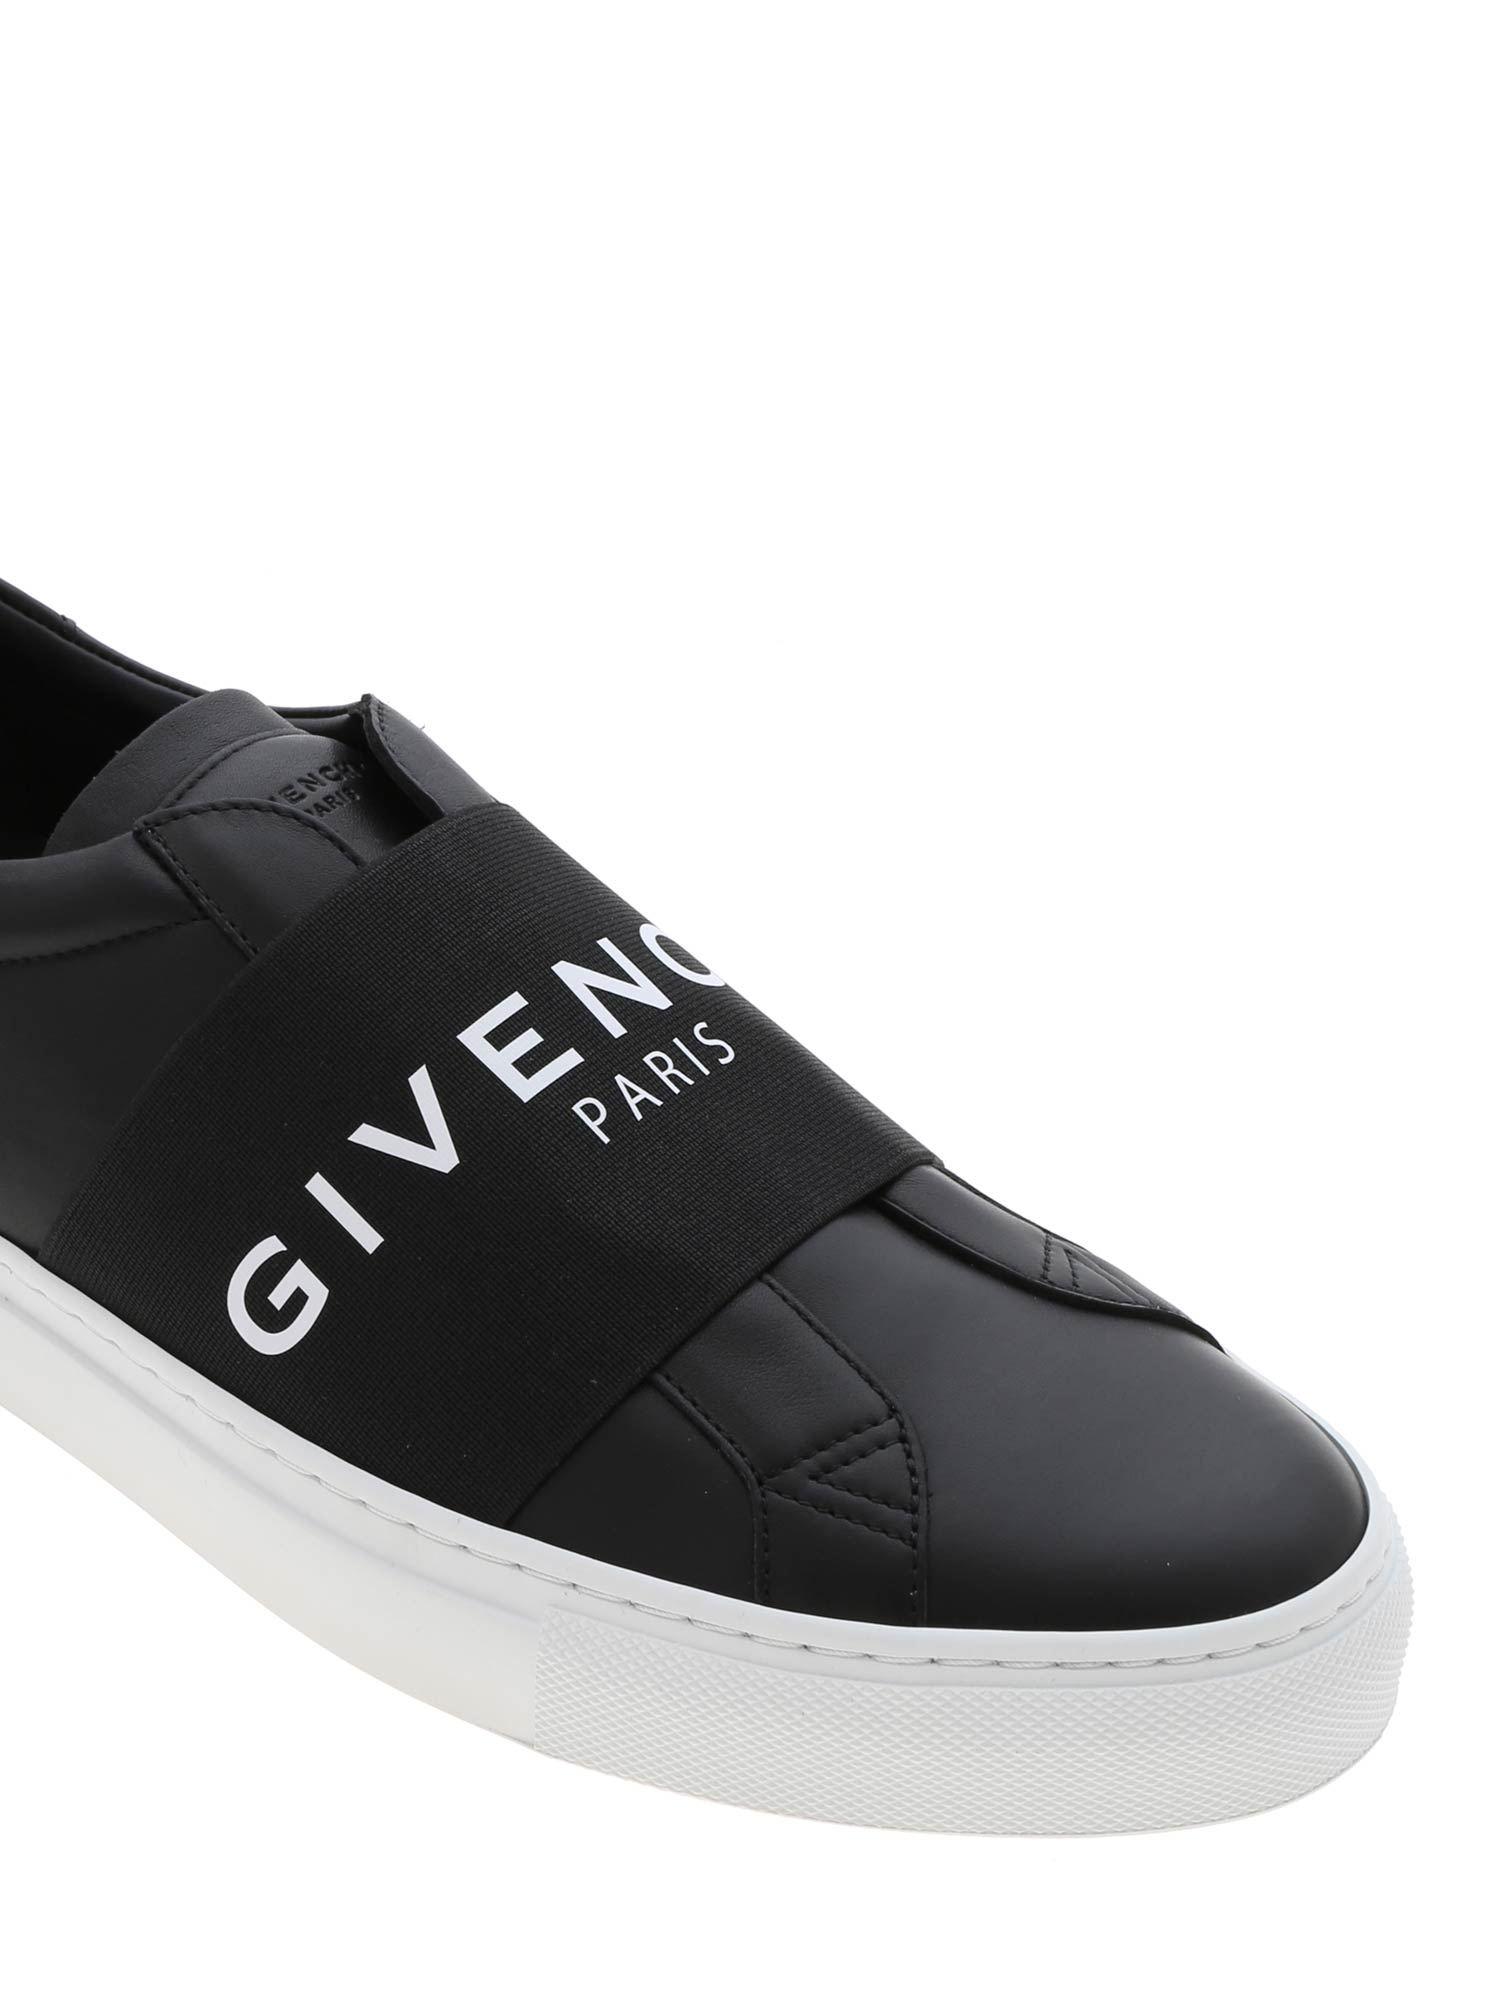 Givenchy Leather Low Top Sneakers in Black for Men - Lyst